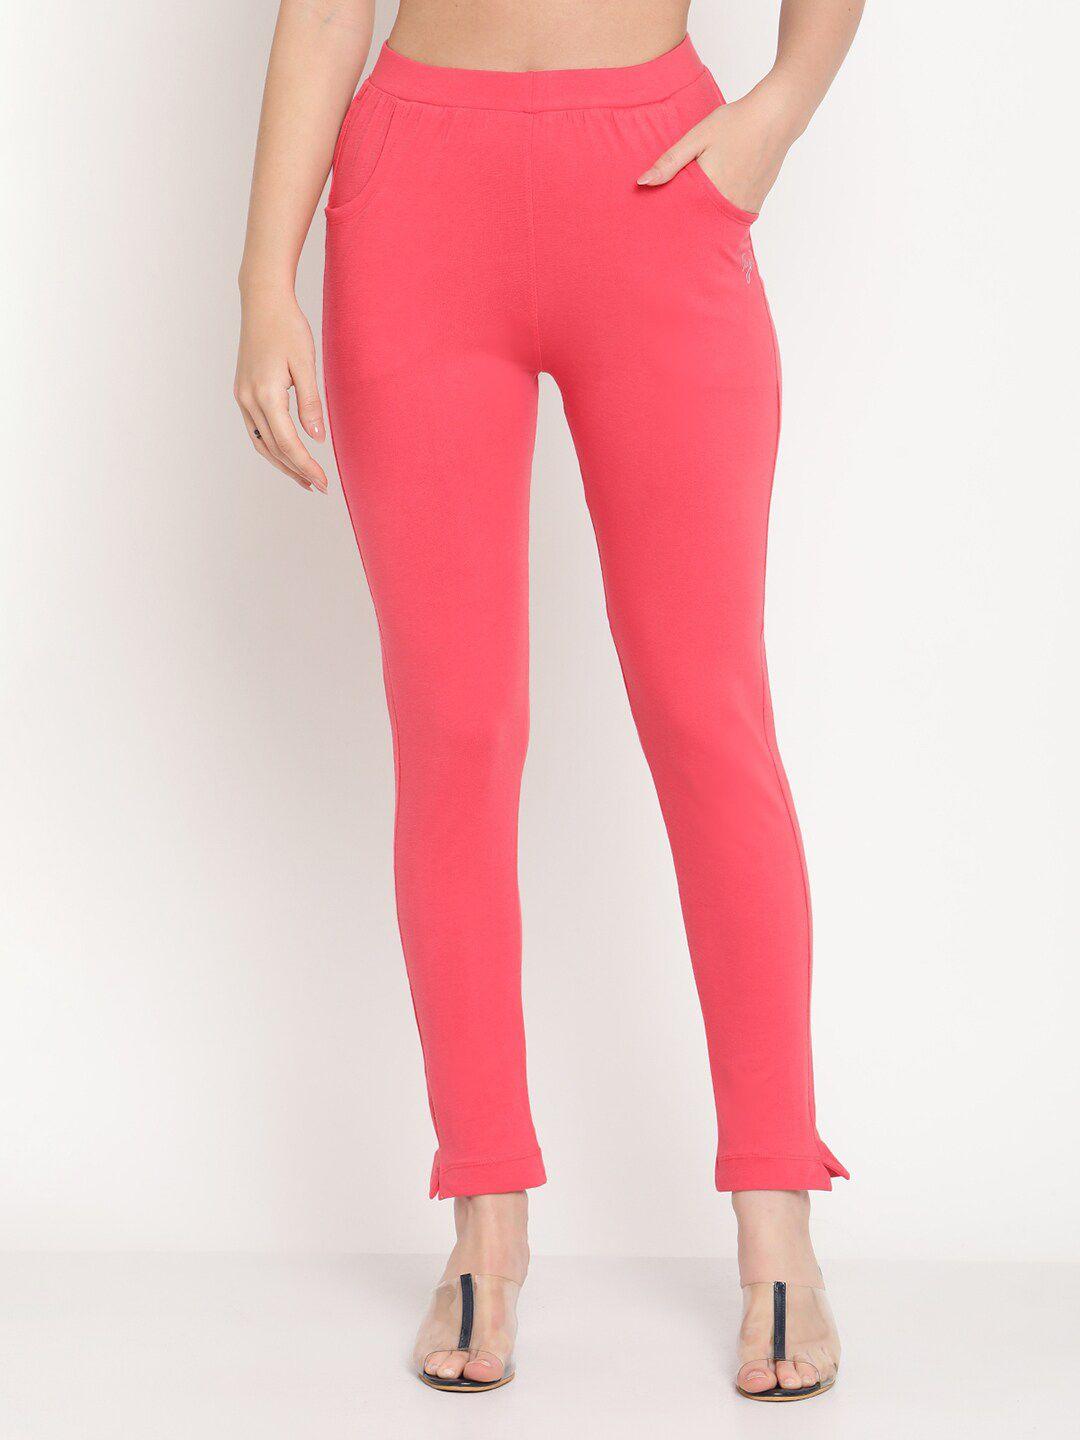 tag 7 women coral pink solid jeggings